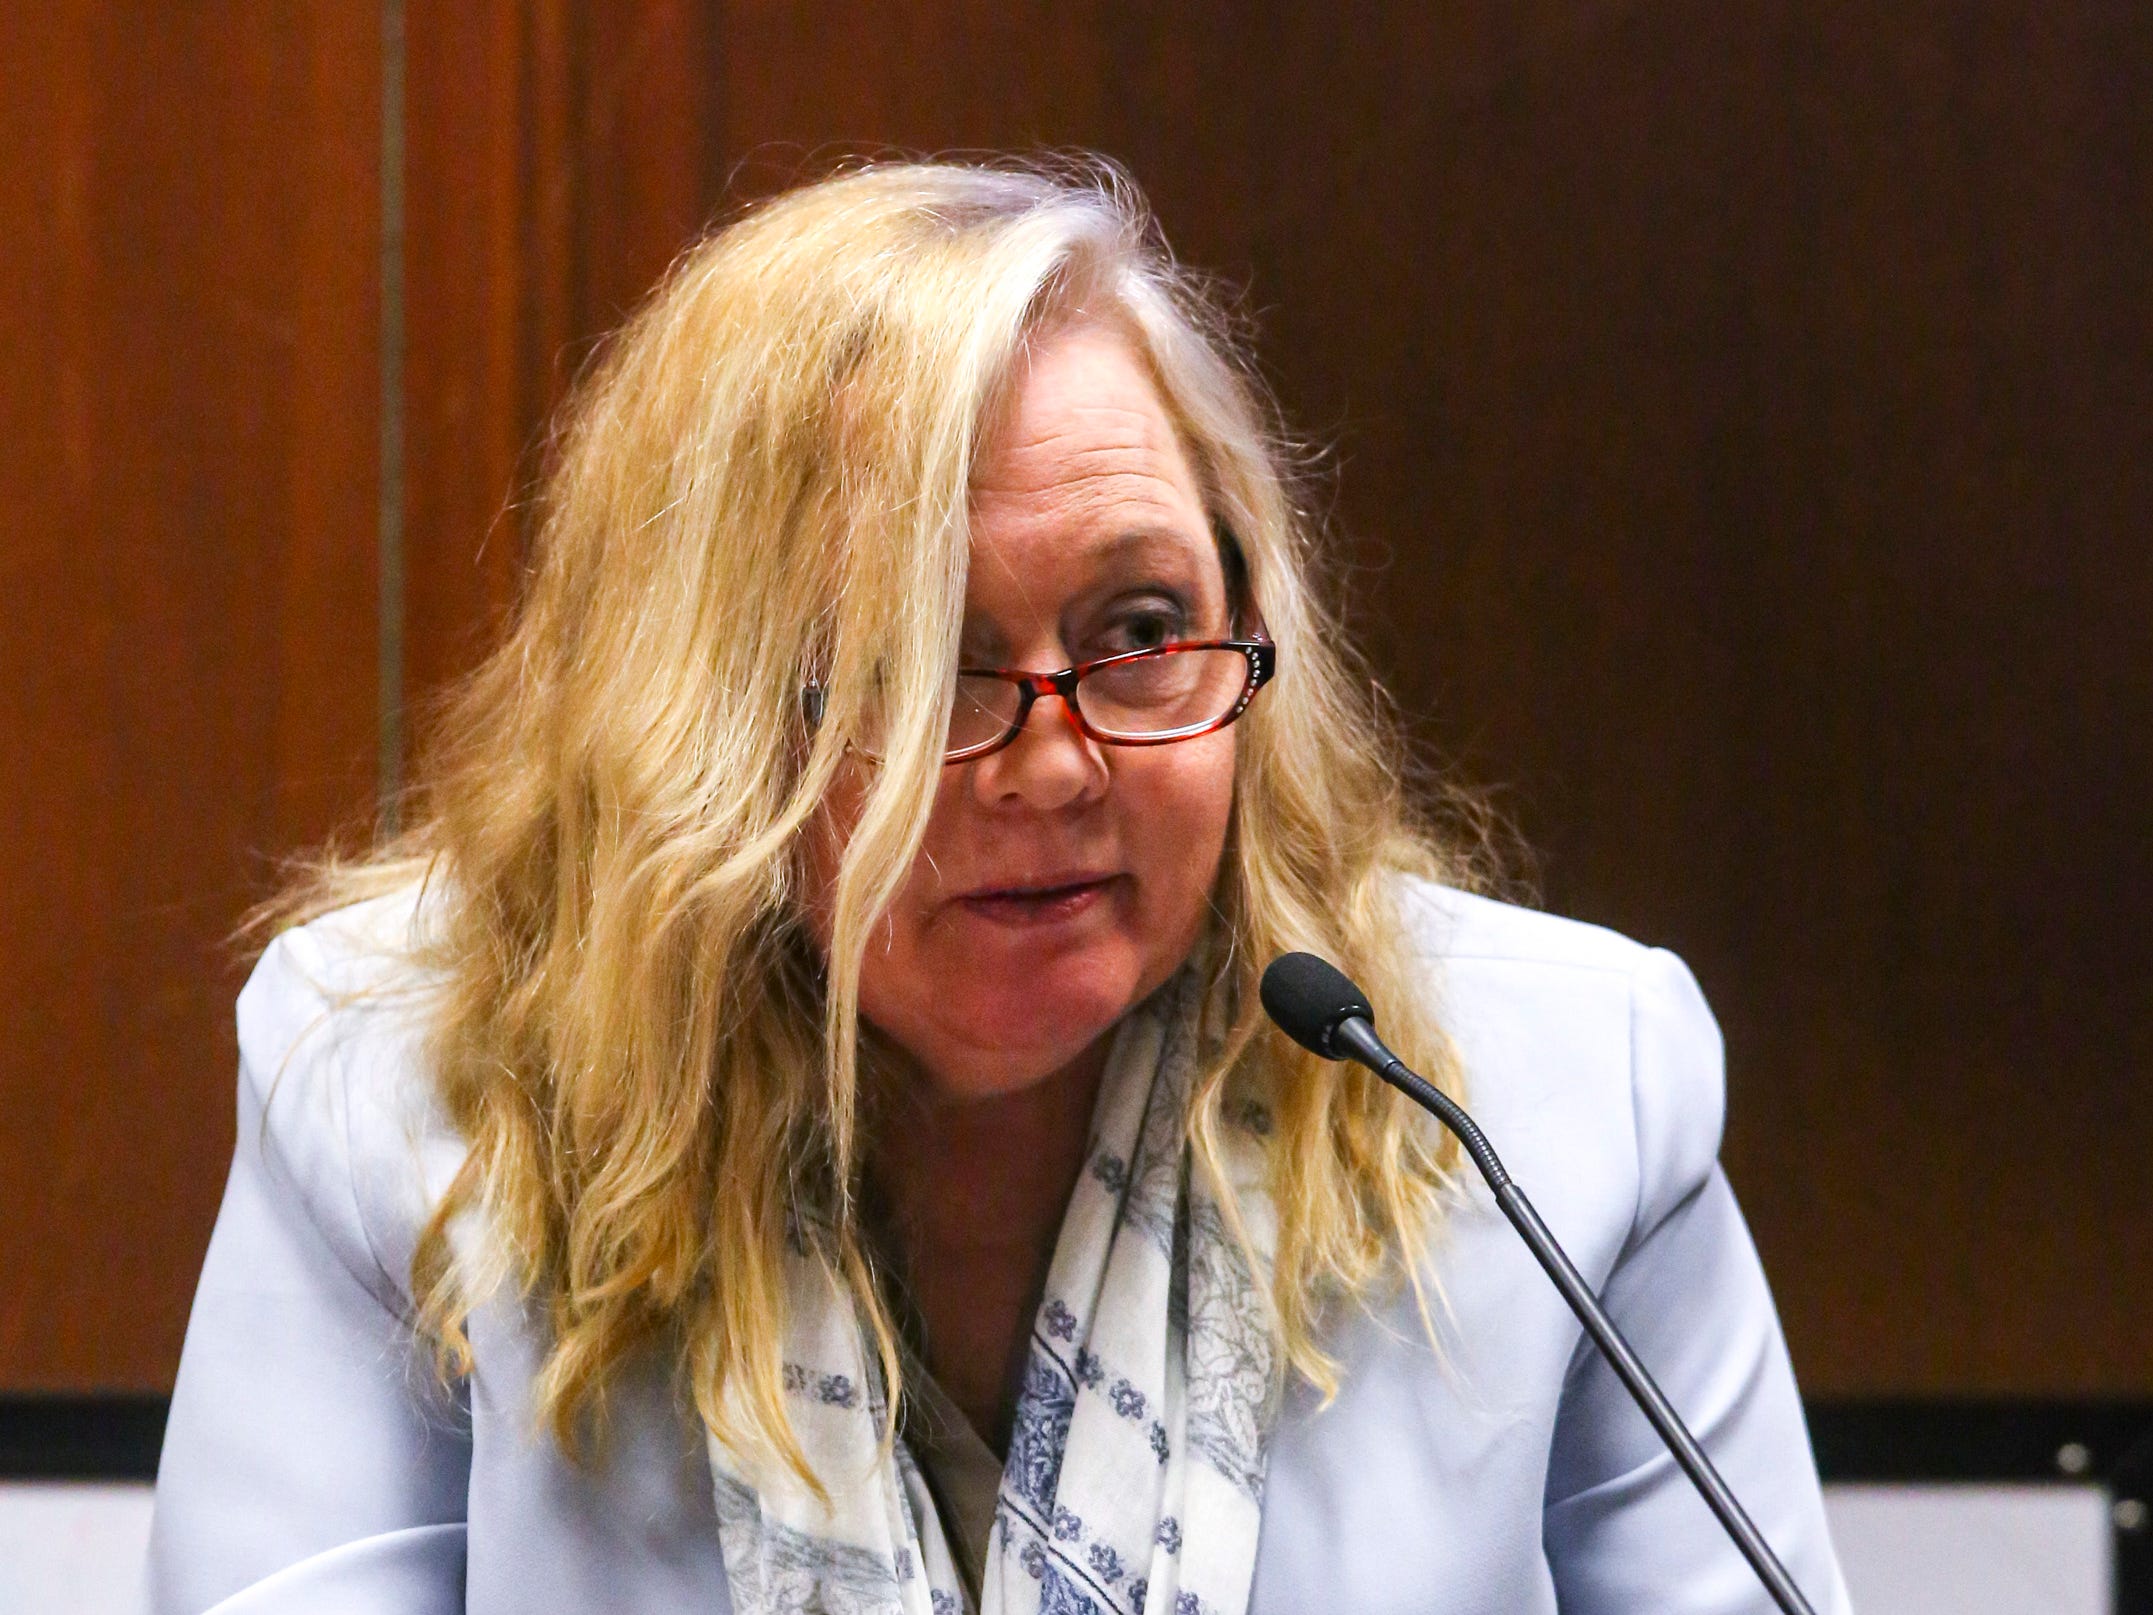 Witness Jane Hansen, CPA and a realtor in Plano, Texas, responds to questions as evidence is presented during the Jerry Burns trial at the Scott County Courthouse in Davenport on Wednesday, Feb. 12, 2020. Hansen went to Kennedy High School in Cedar Rapids with Michelle Martinko, as was at a choir banquet with Martinko the night she was killed.